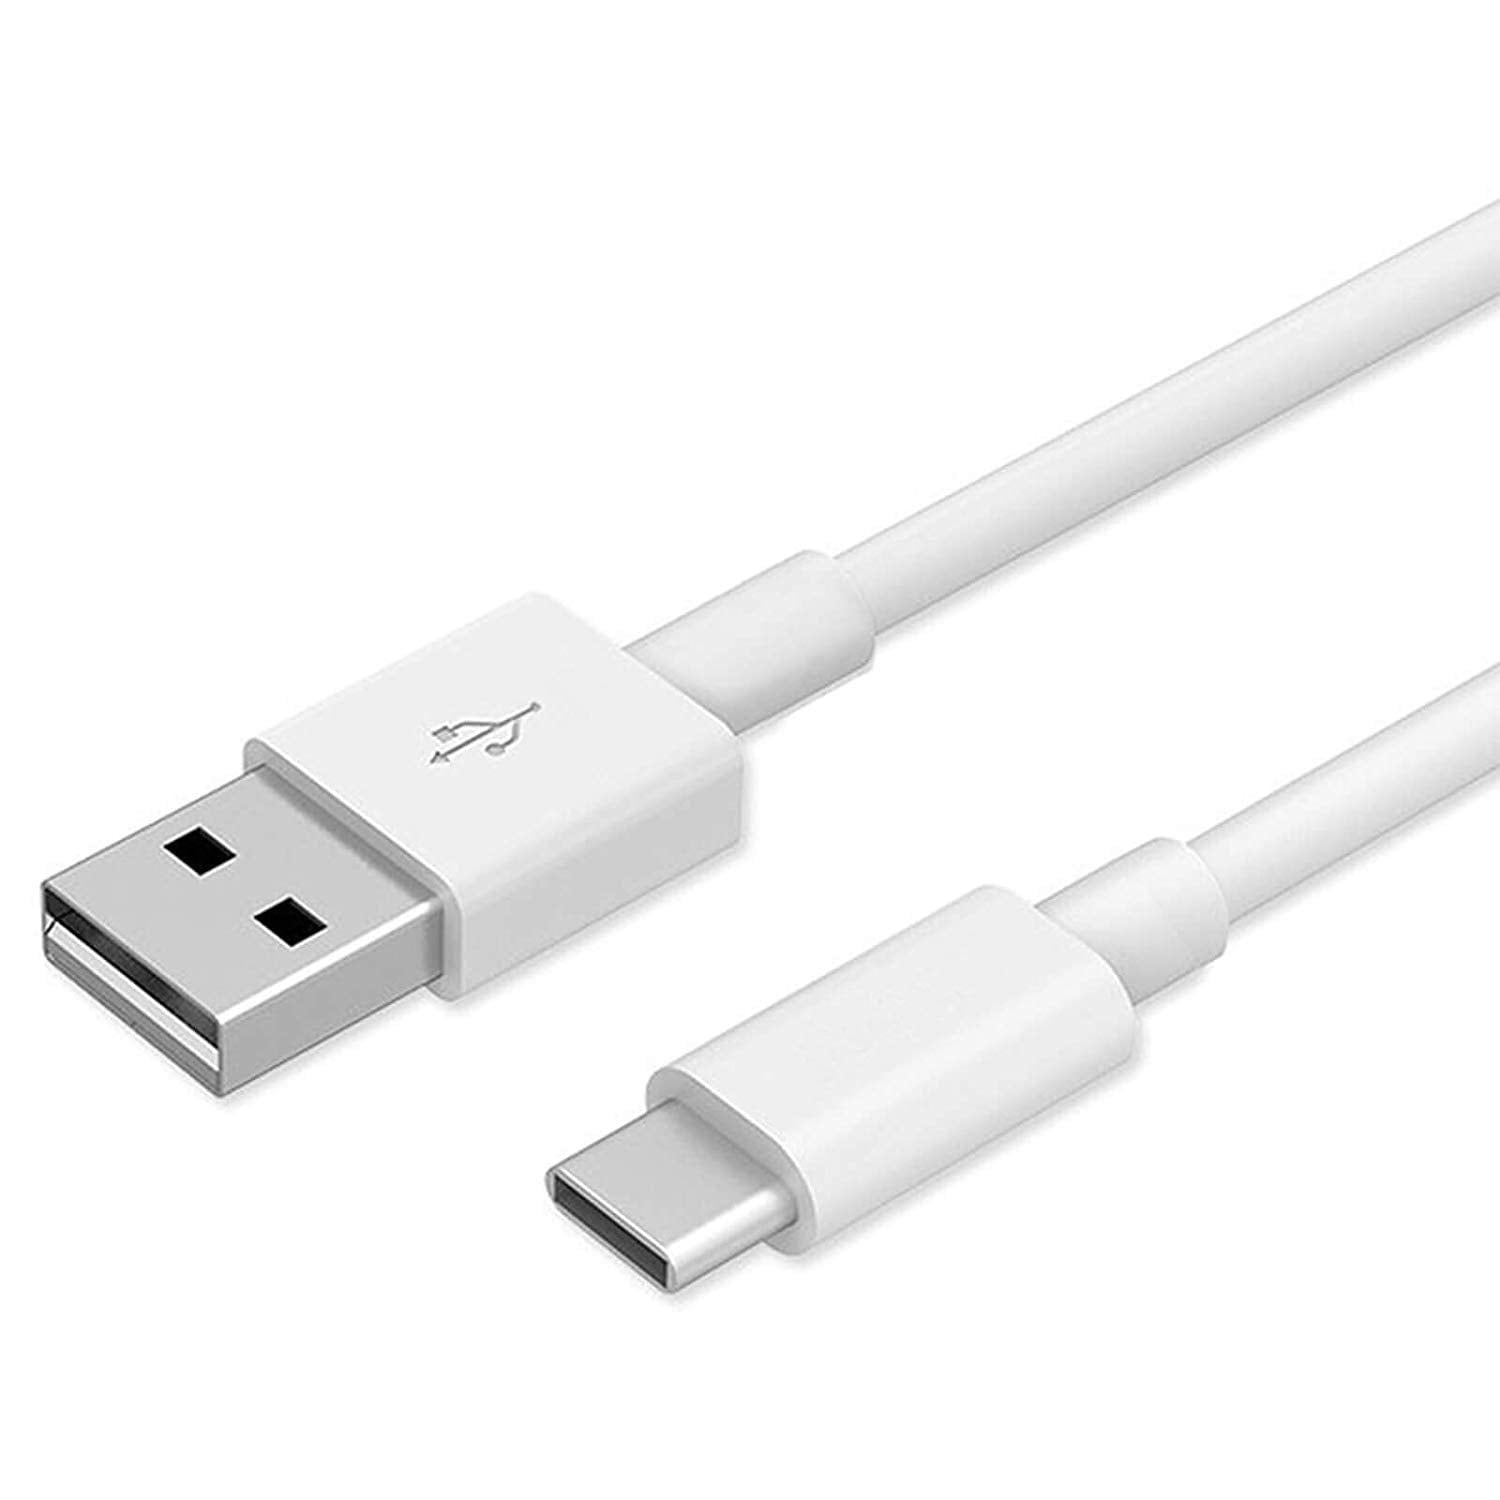 Samsung Galaxy A20e USB to Type C Charging Cable Lead White - 2M - SmartPhoneGadgetUK